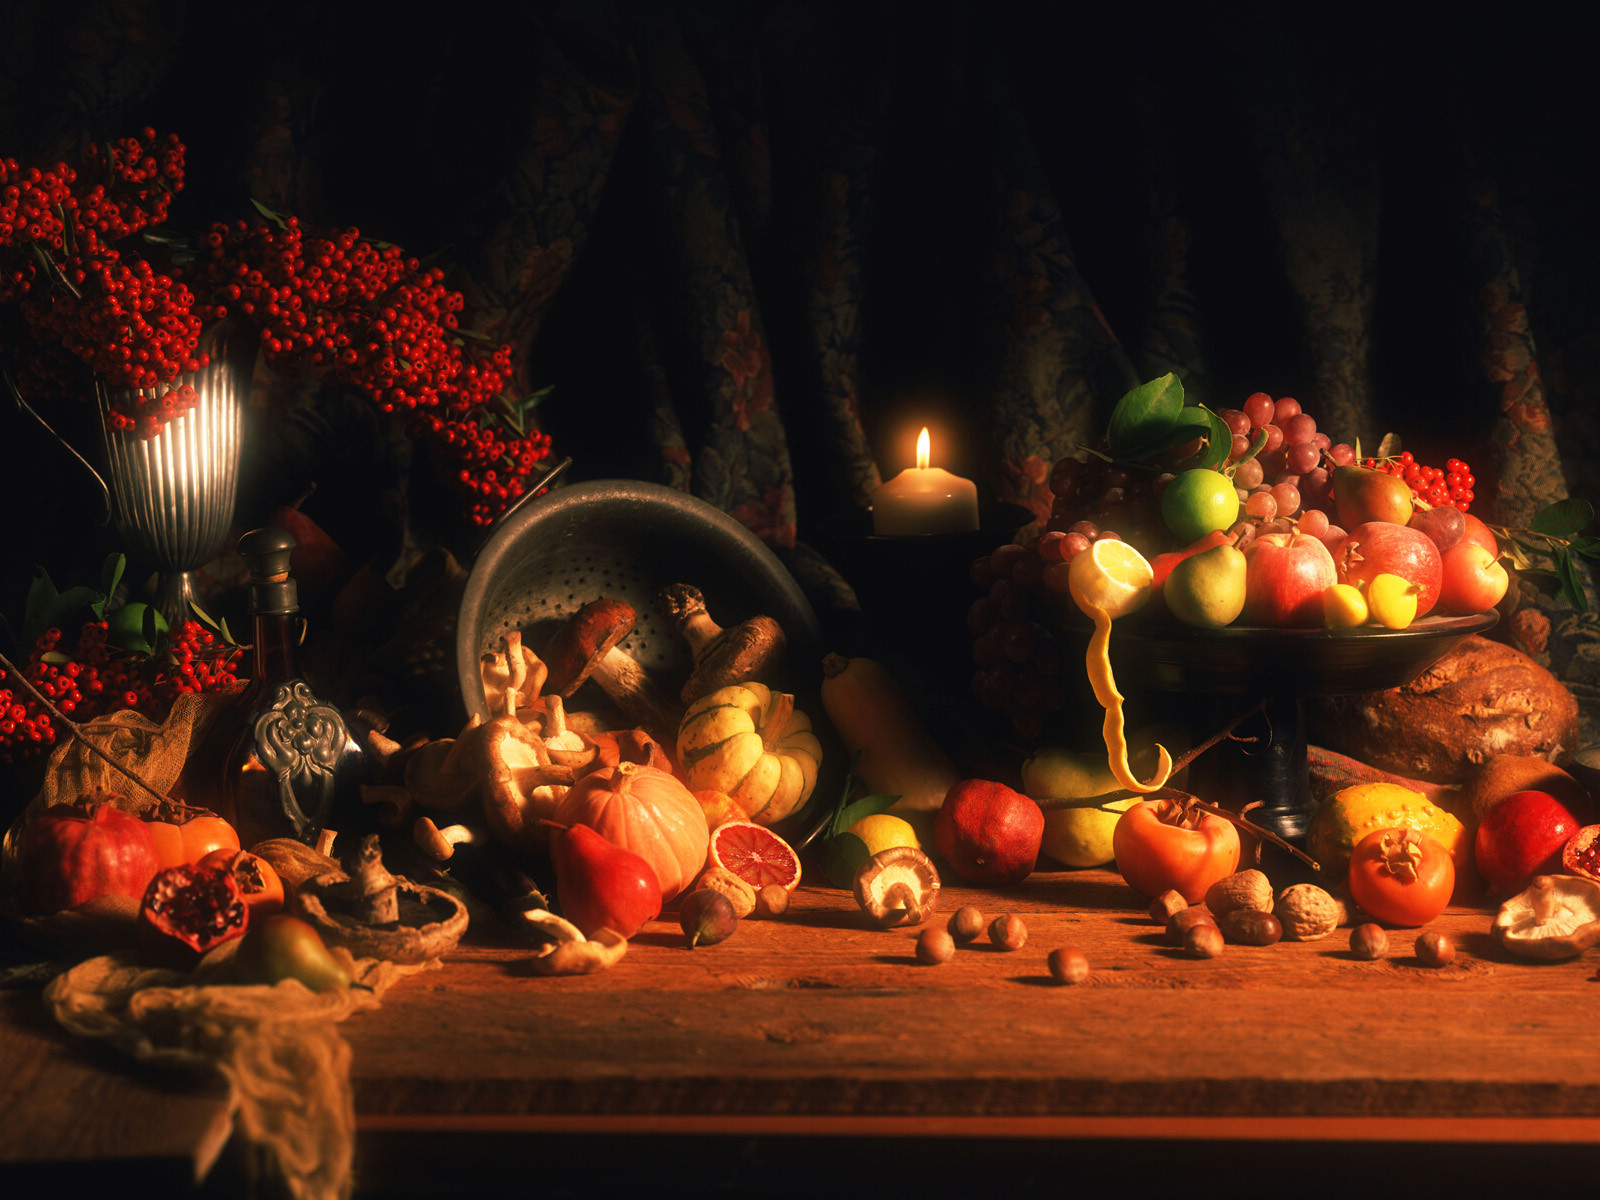 Thanksgiving wallpaper for Windows 7/8.1/10 | All for Windows 10 Free